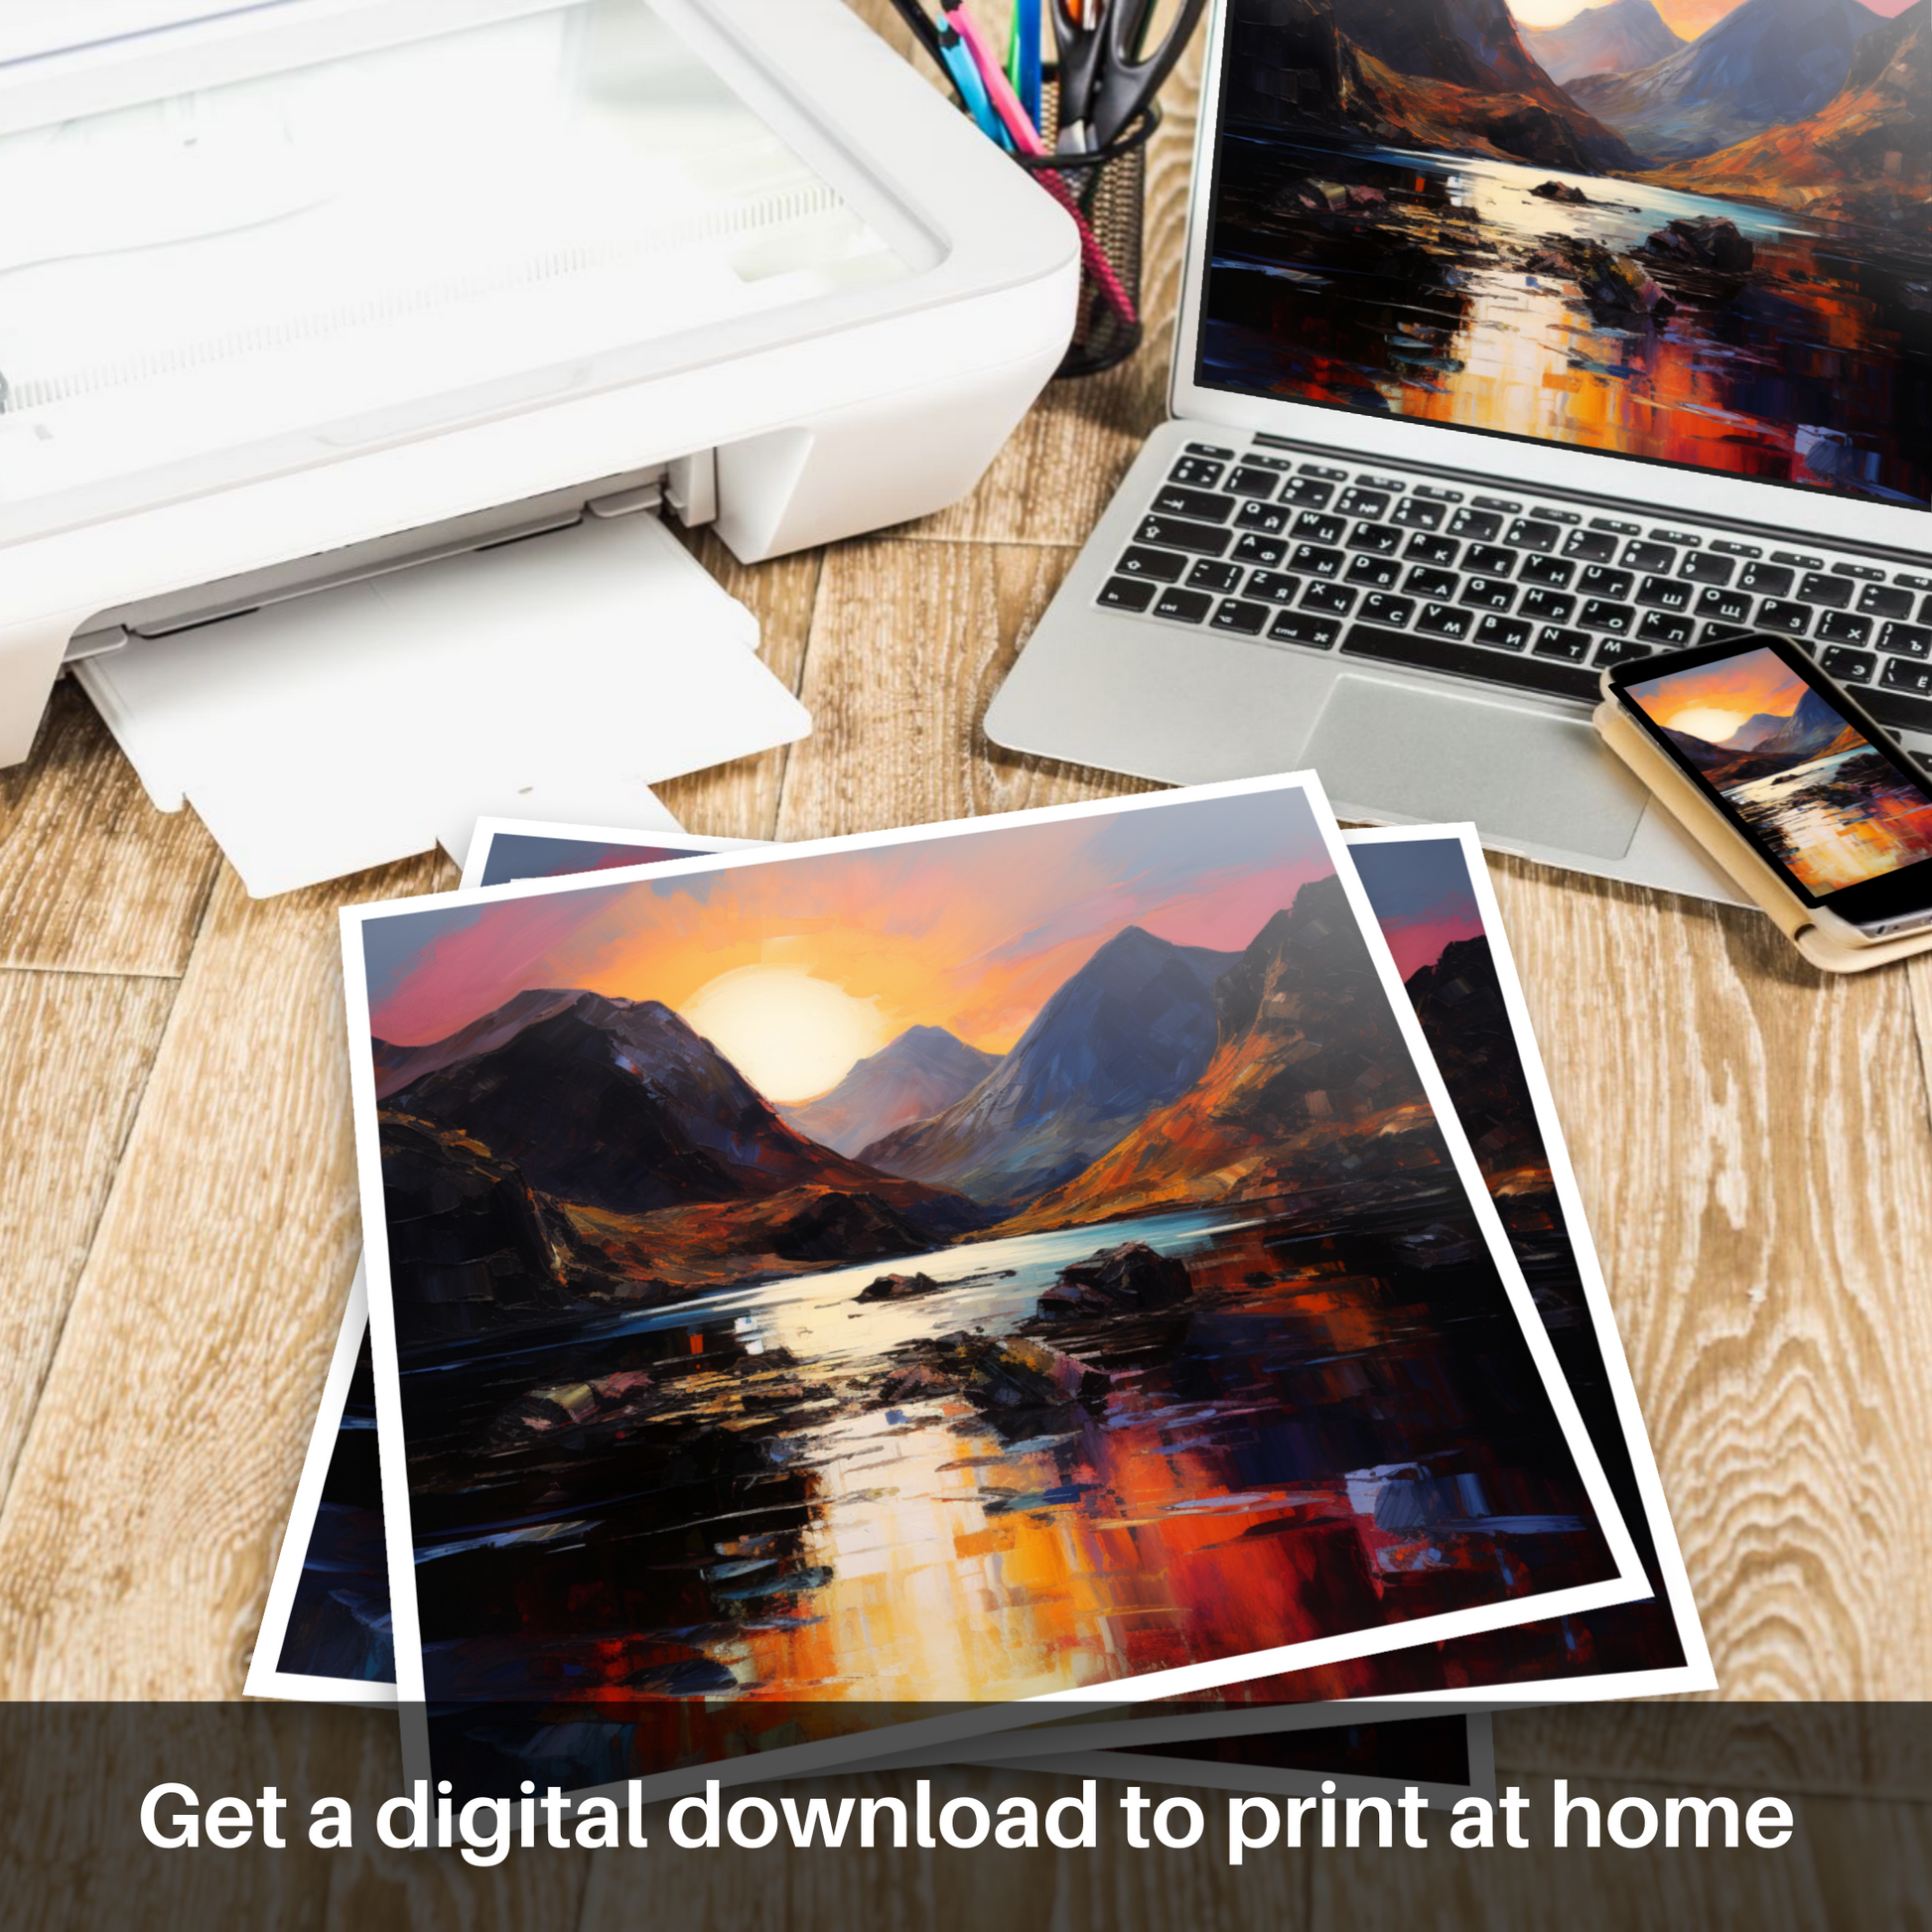 Downloadable and printable picture of Loch Coruisk at sunset